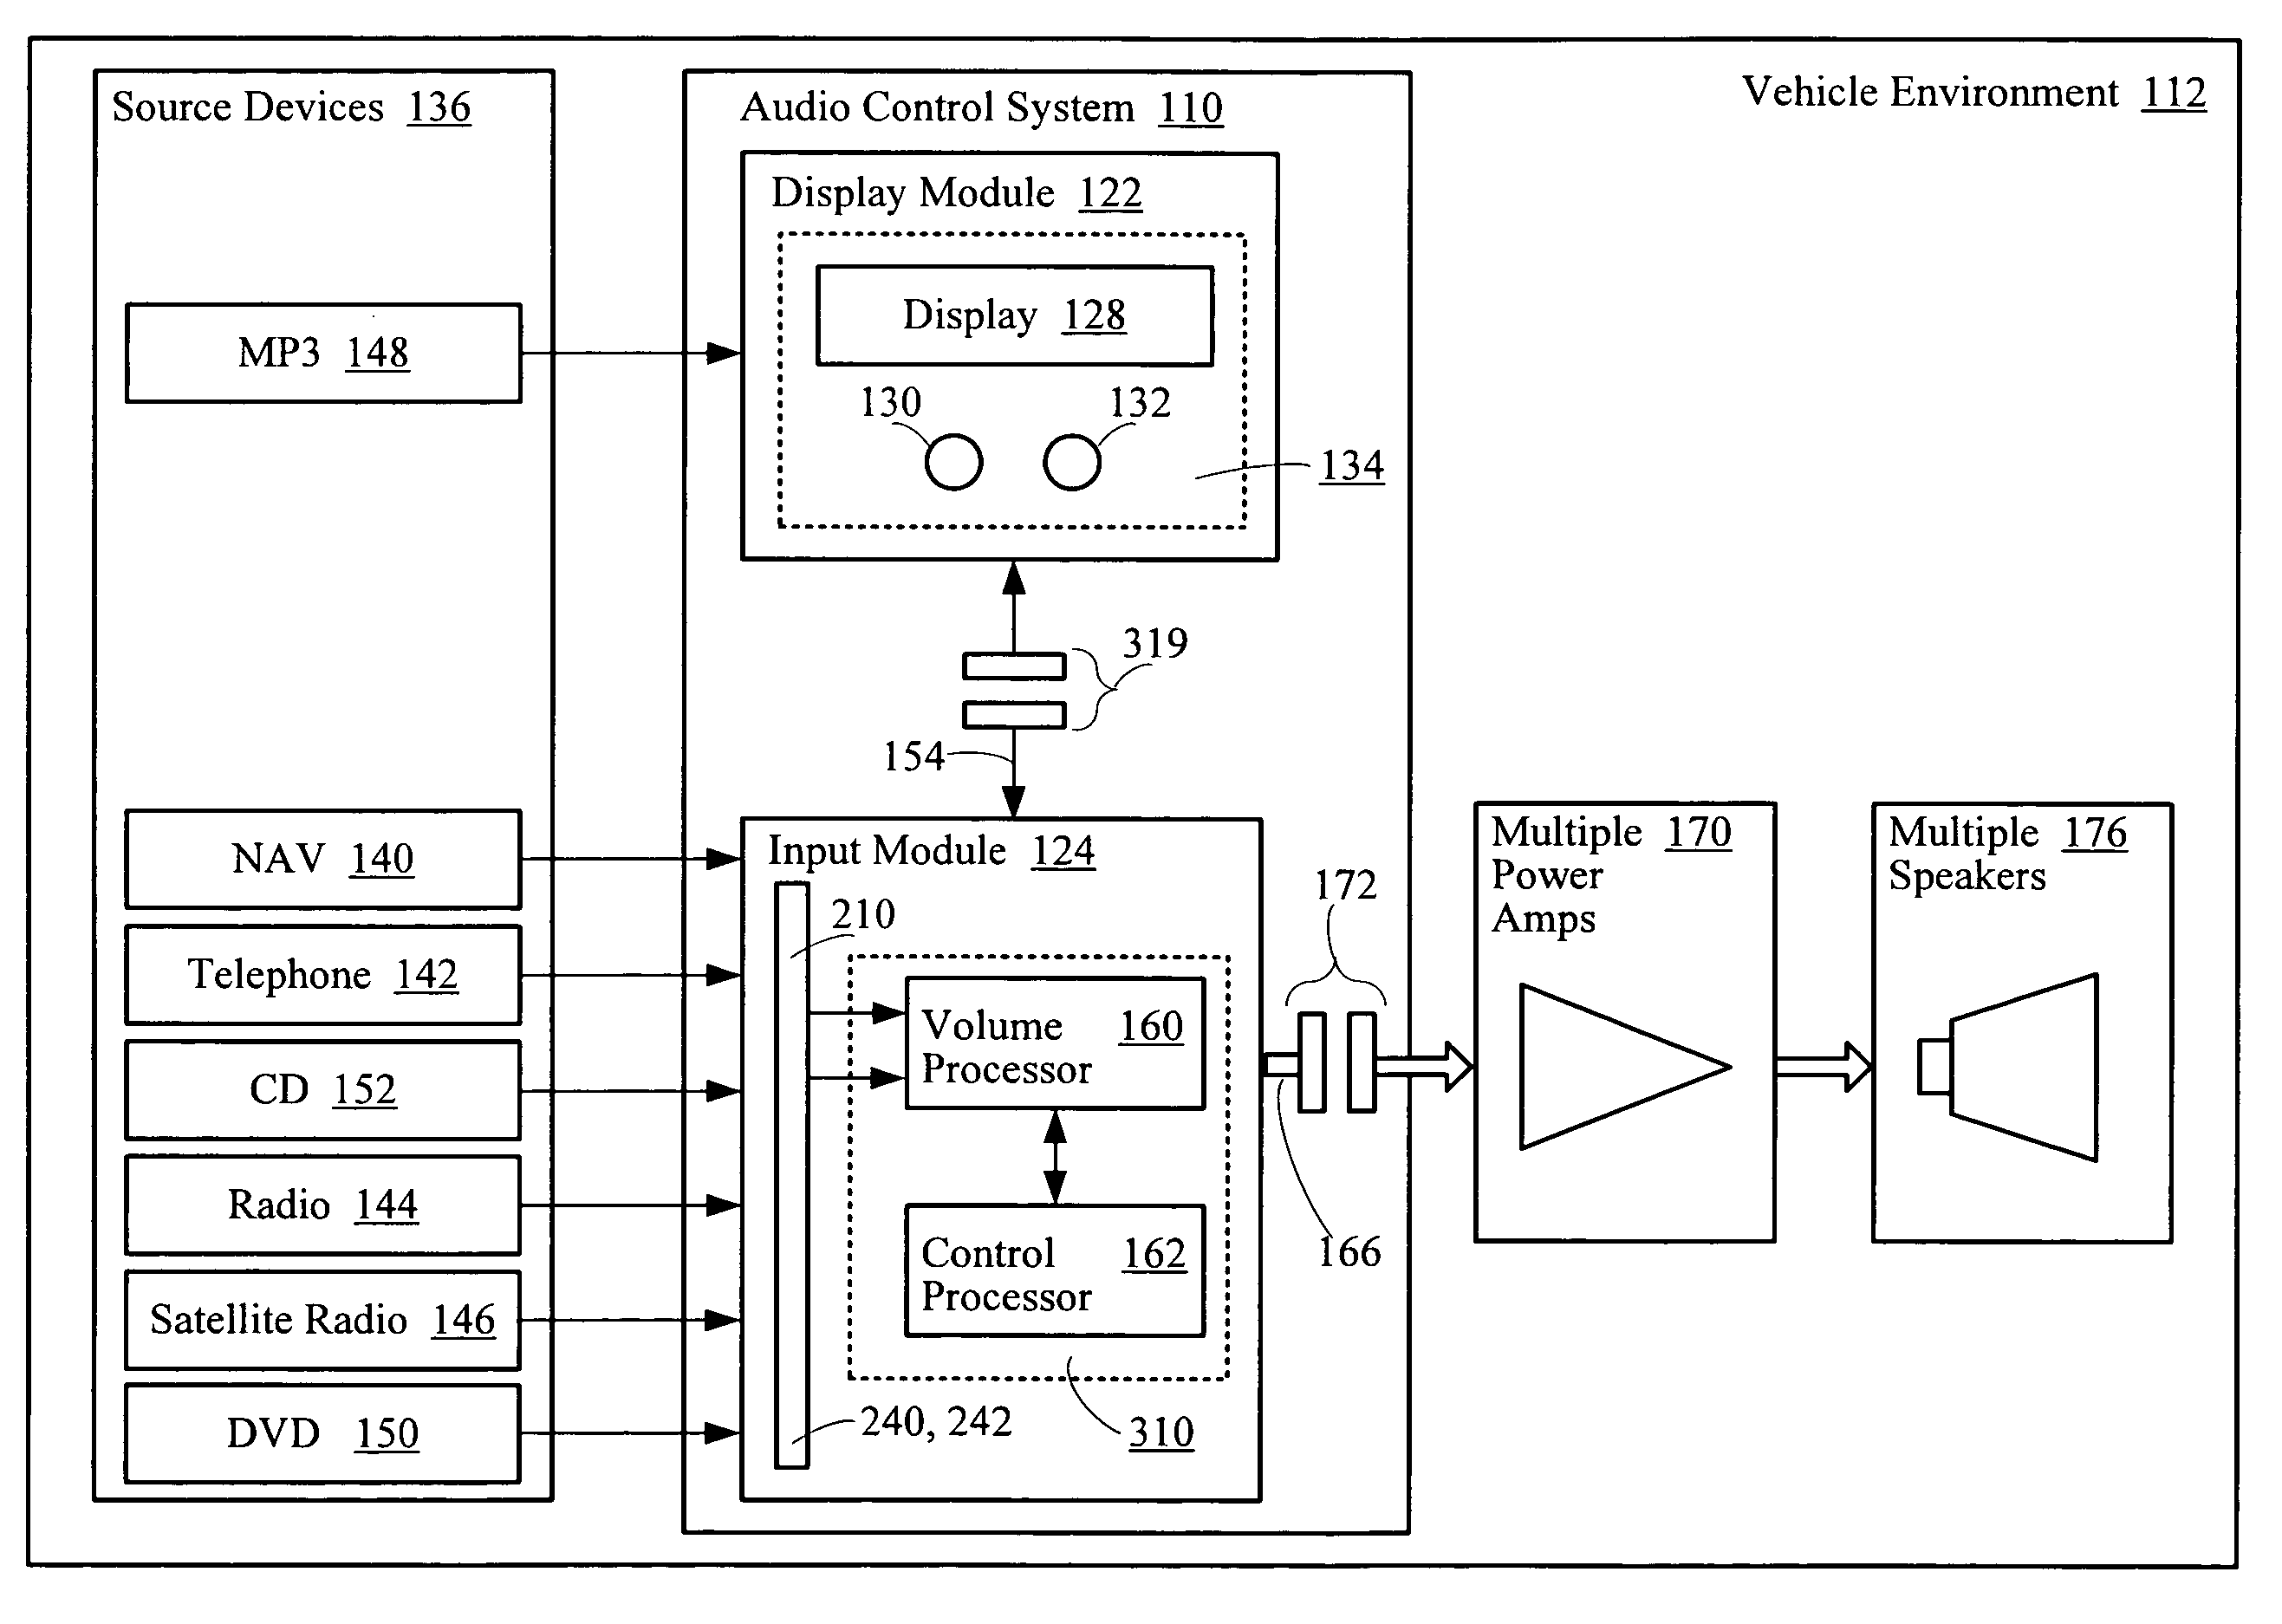 Audio control system for a vehicle